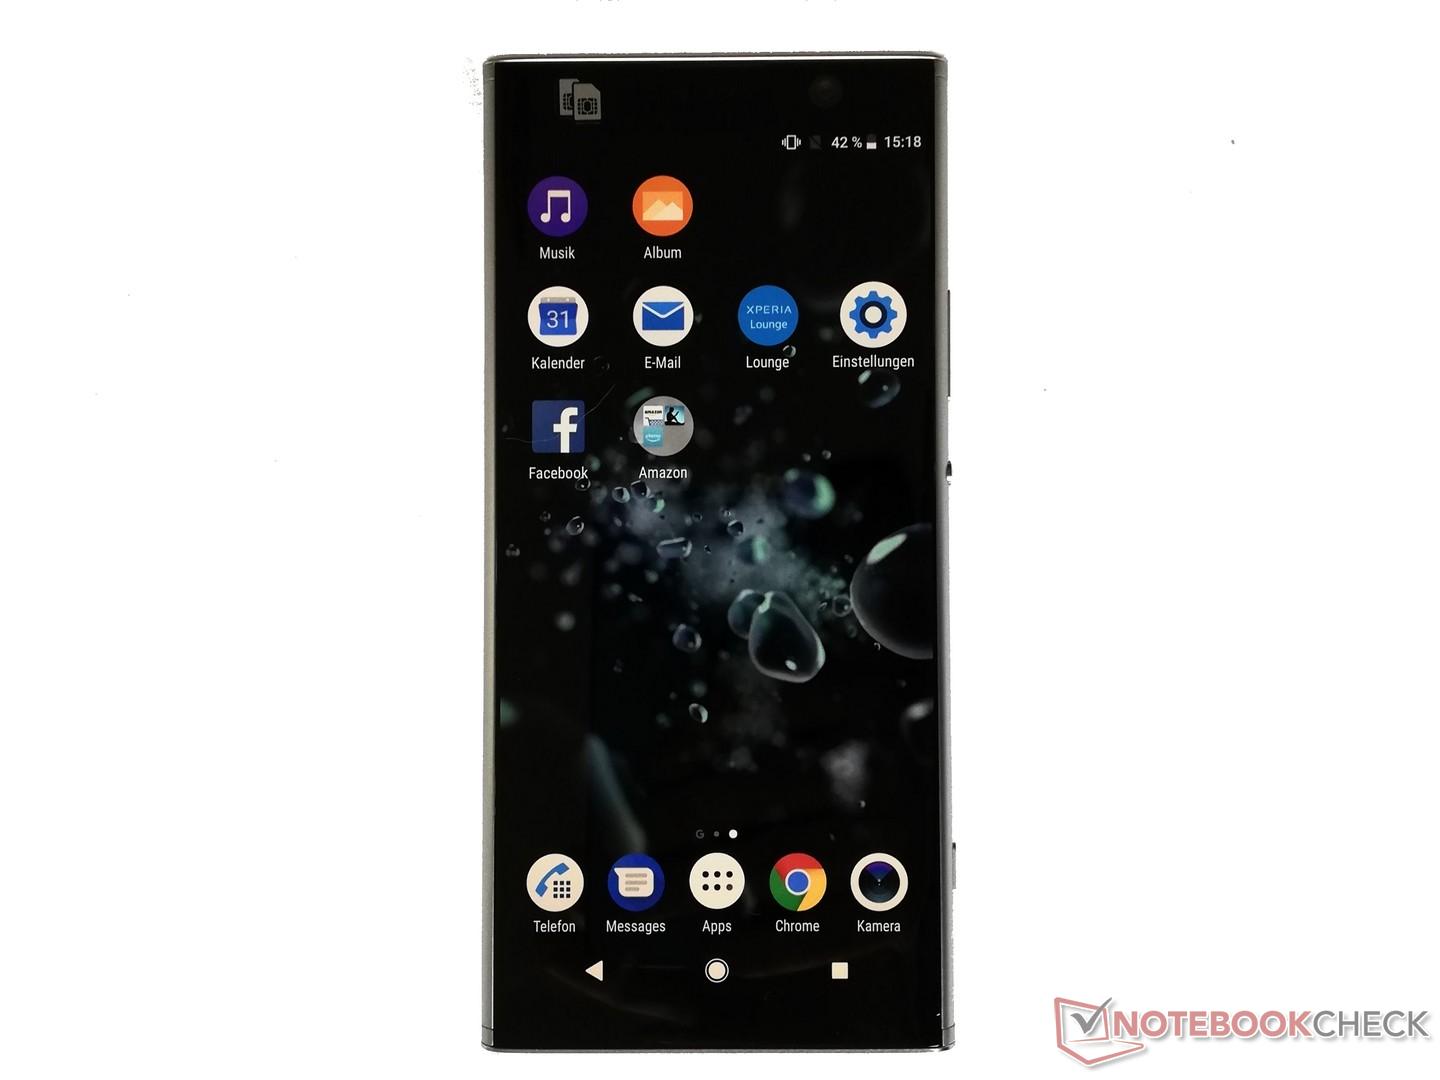 Sony Xperia XA2 Plus Smartphone Review - NotebookCheck.net Reviews